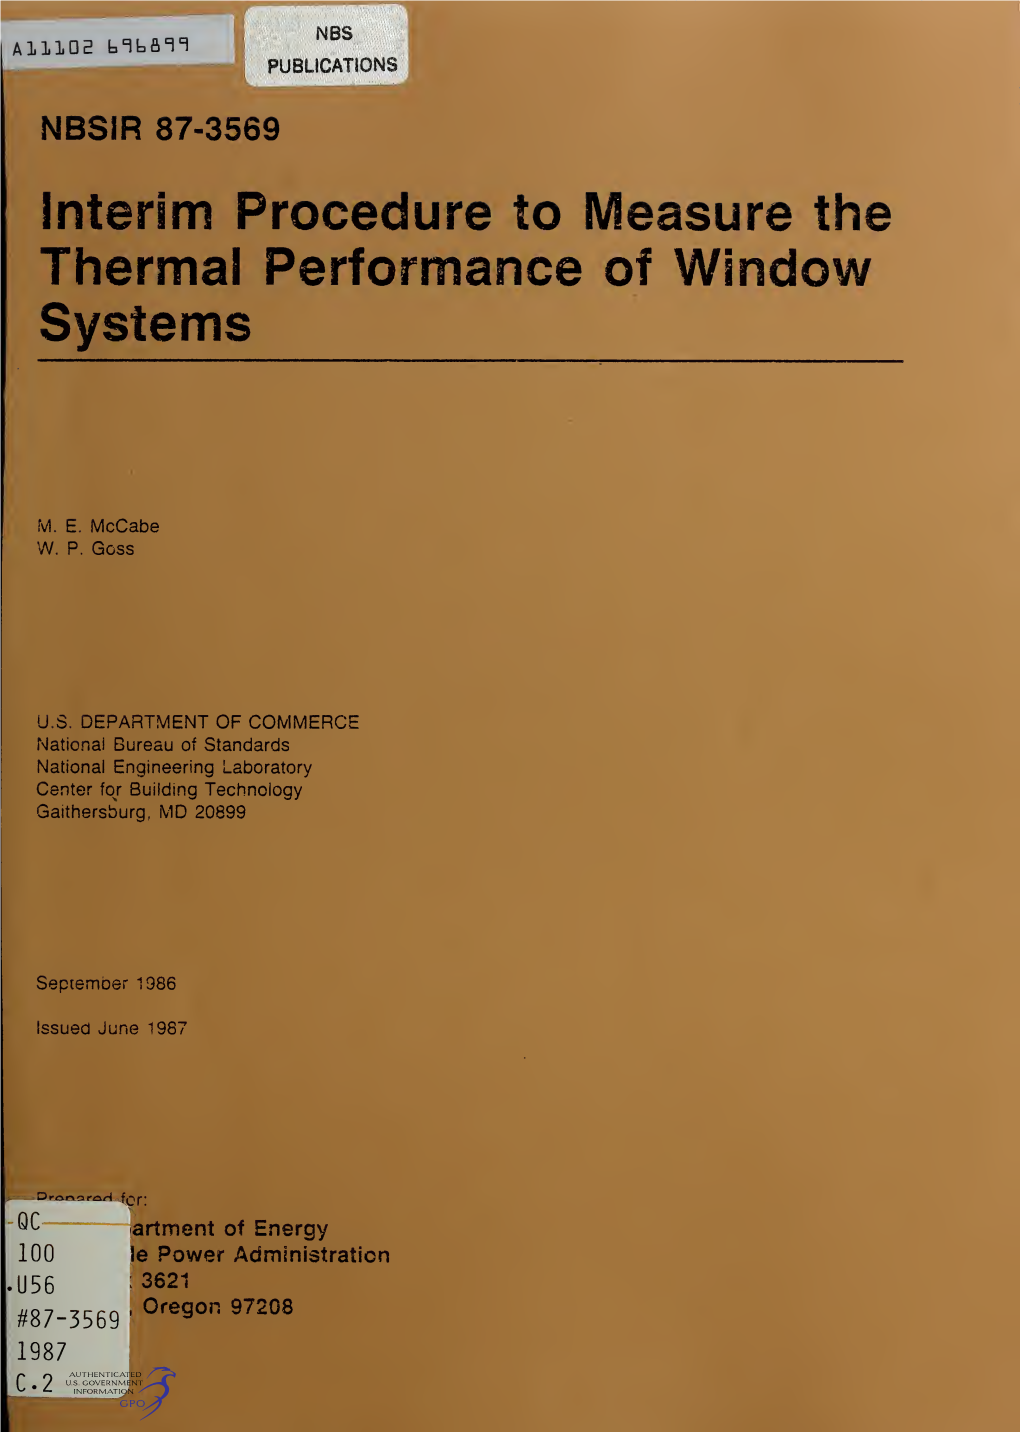 Interim Procedure to Measure the Thermal Performance of Window Systems